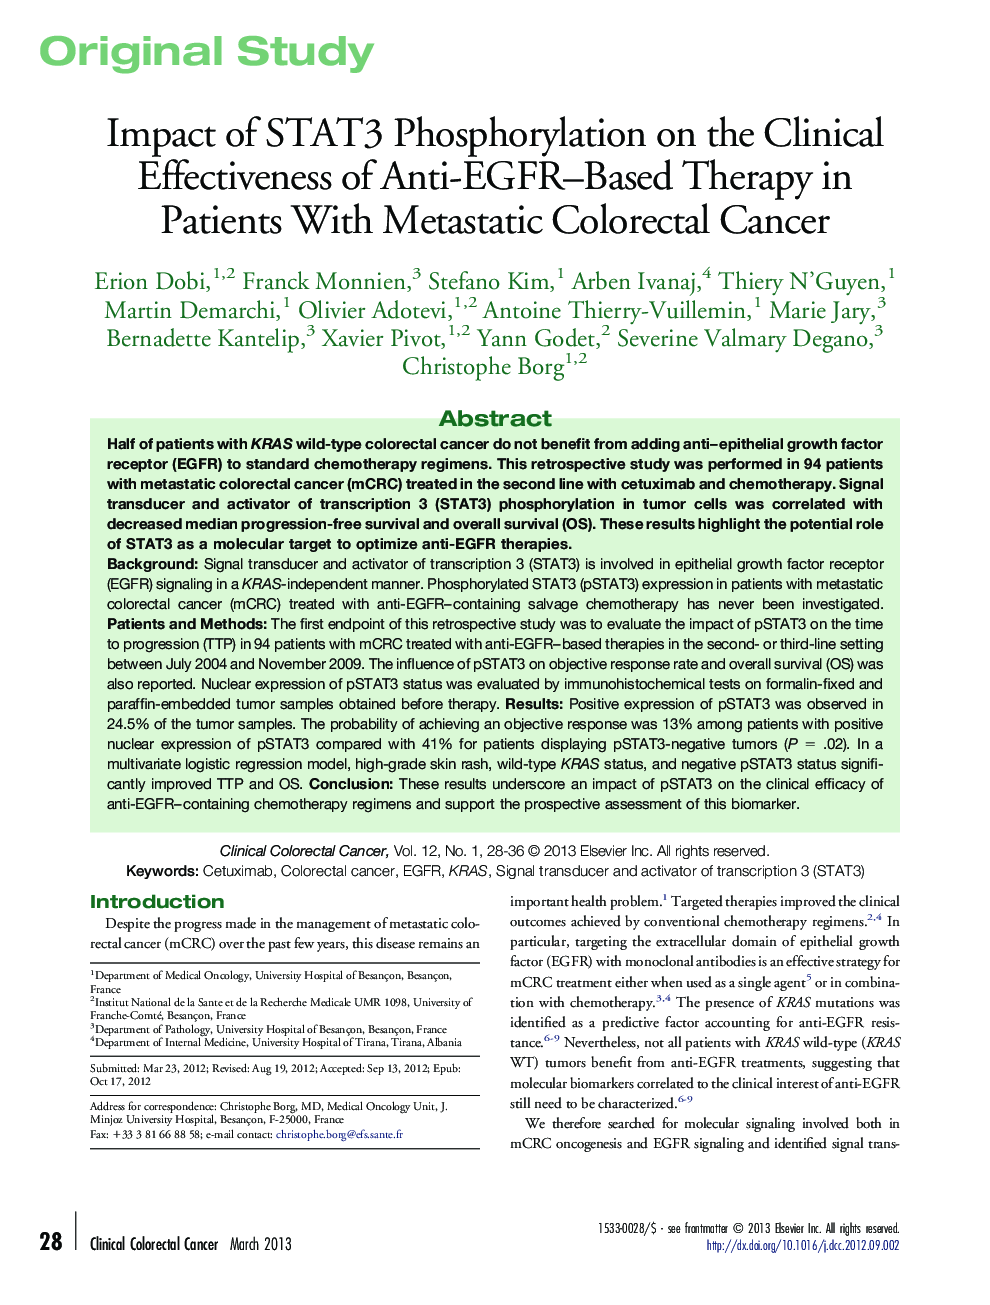 Impact of STAT3 Phosphorylation on the Clinical Effectiveness of Anti-EGFR–Based Therapy in Patients With Metastatic Colorectal Cancer